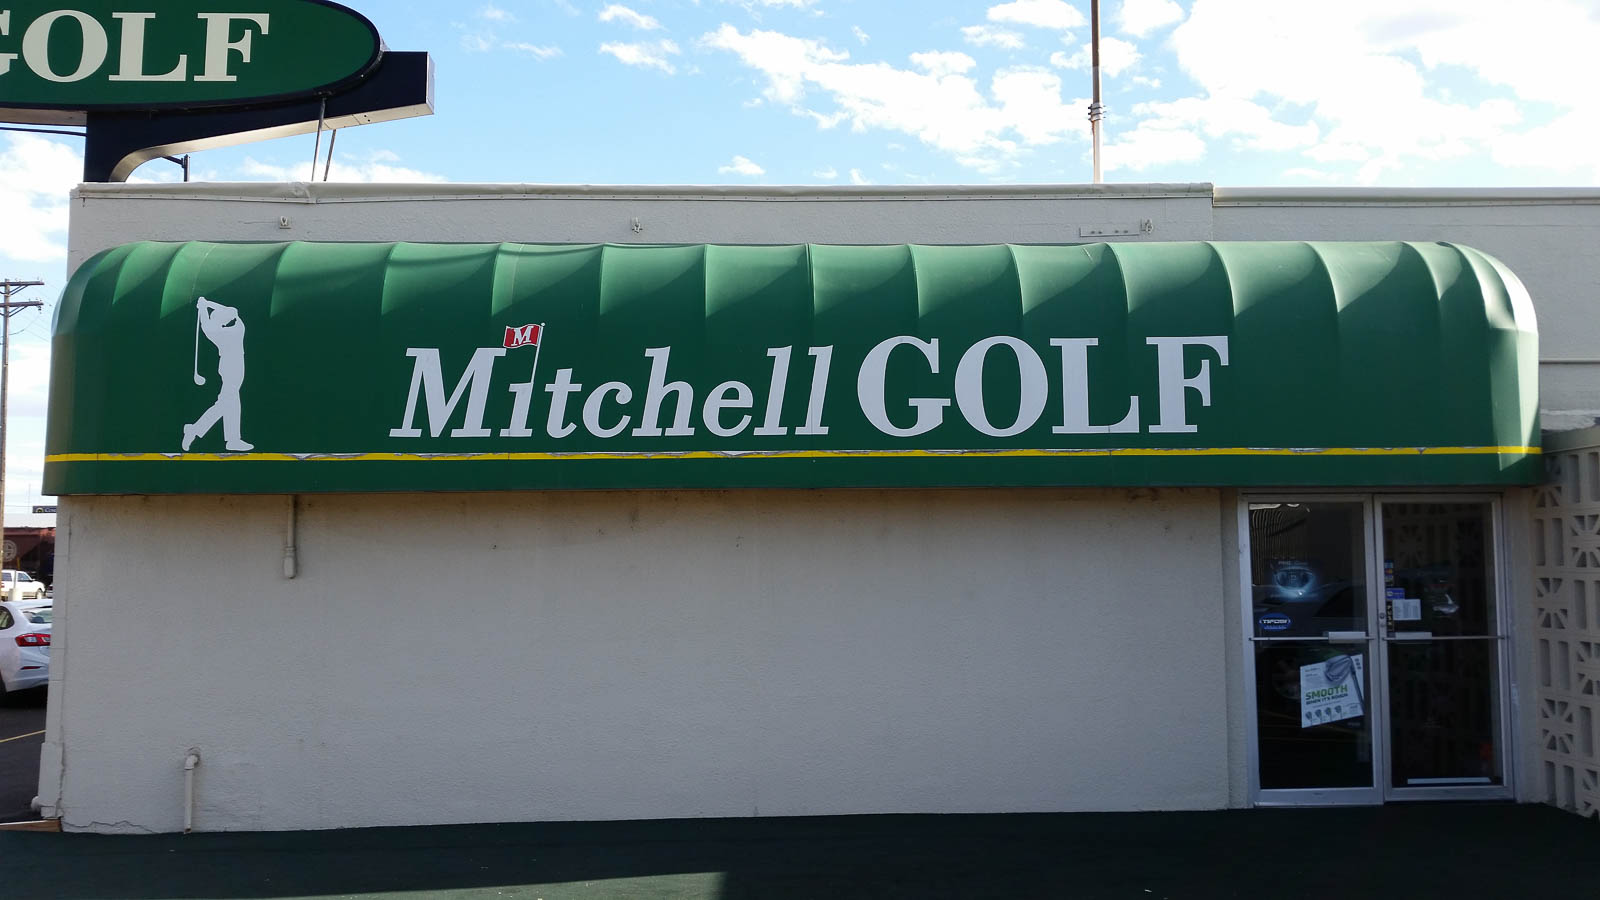 Awning for Mitchell Golf